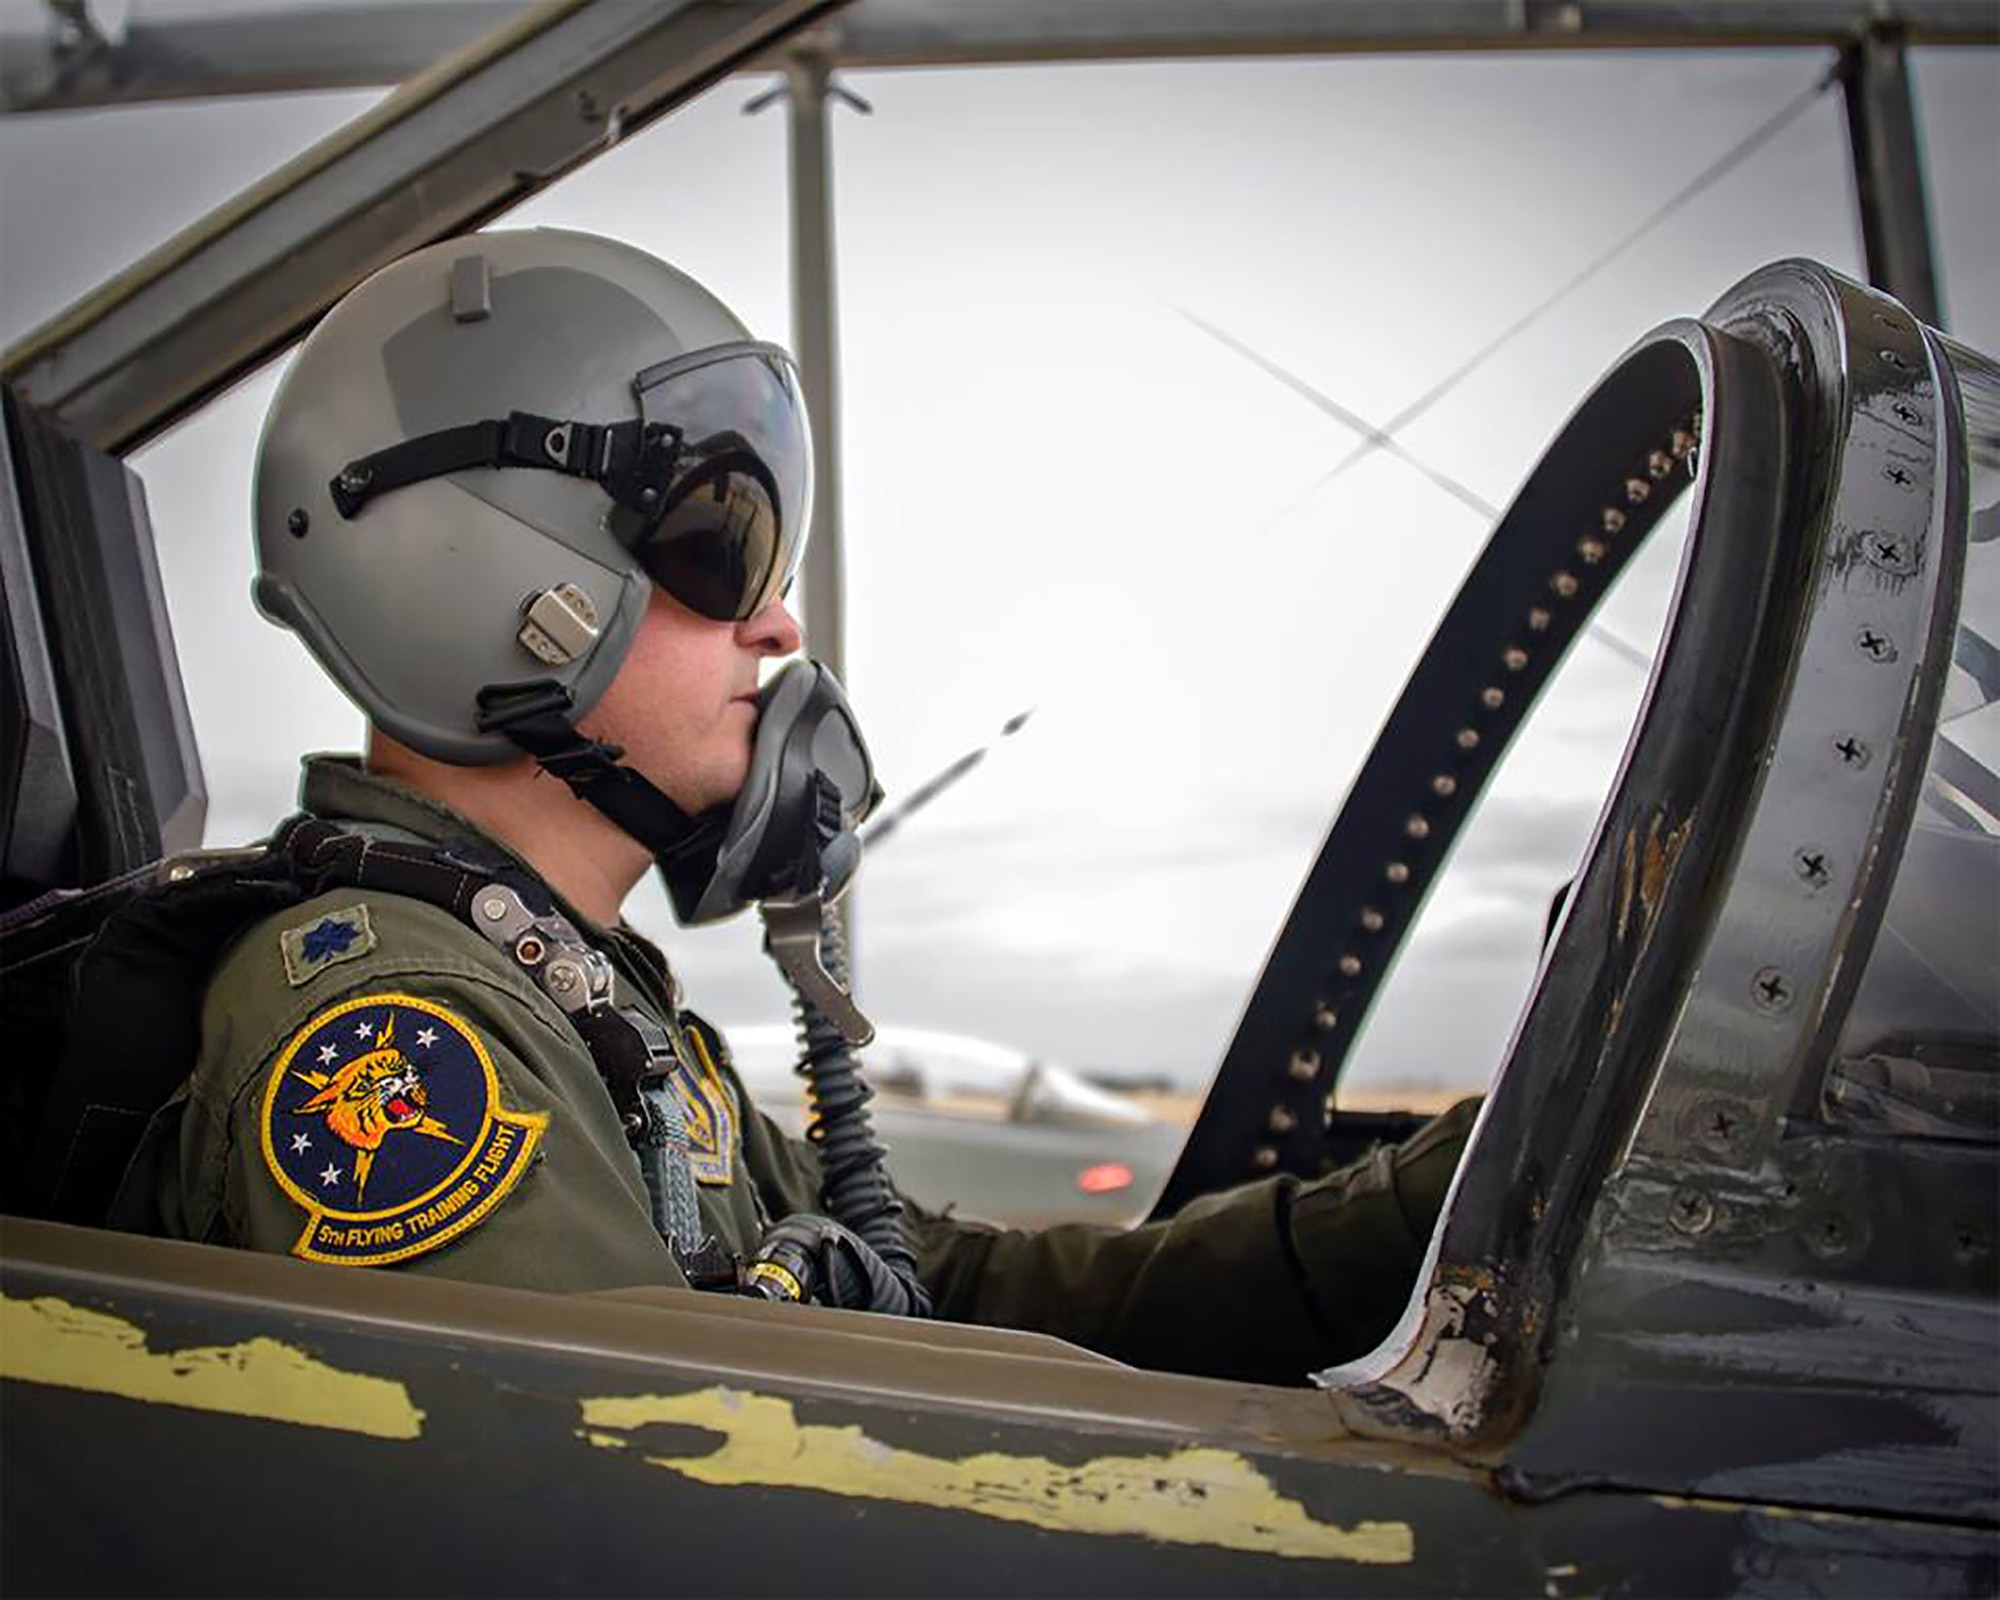 Even though the pilot shortage is hitting fighter units the hardest, it is also having an impact on other flying organizations as well, including training squadrons like the 5th Flying Training Squadron at Vance Air Force Base, Oklahoma, where Lt. Col. Darren "Shead" McTee, a T-38 instructor pilot, is assigned. (Courtesy photo)